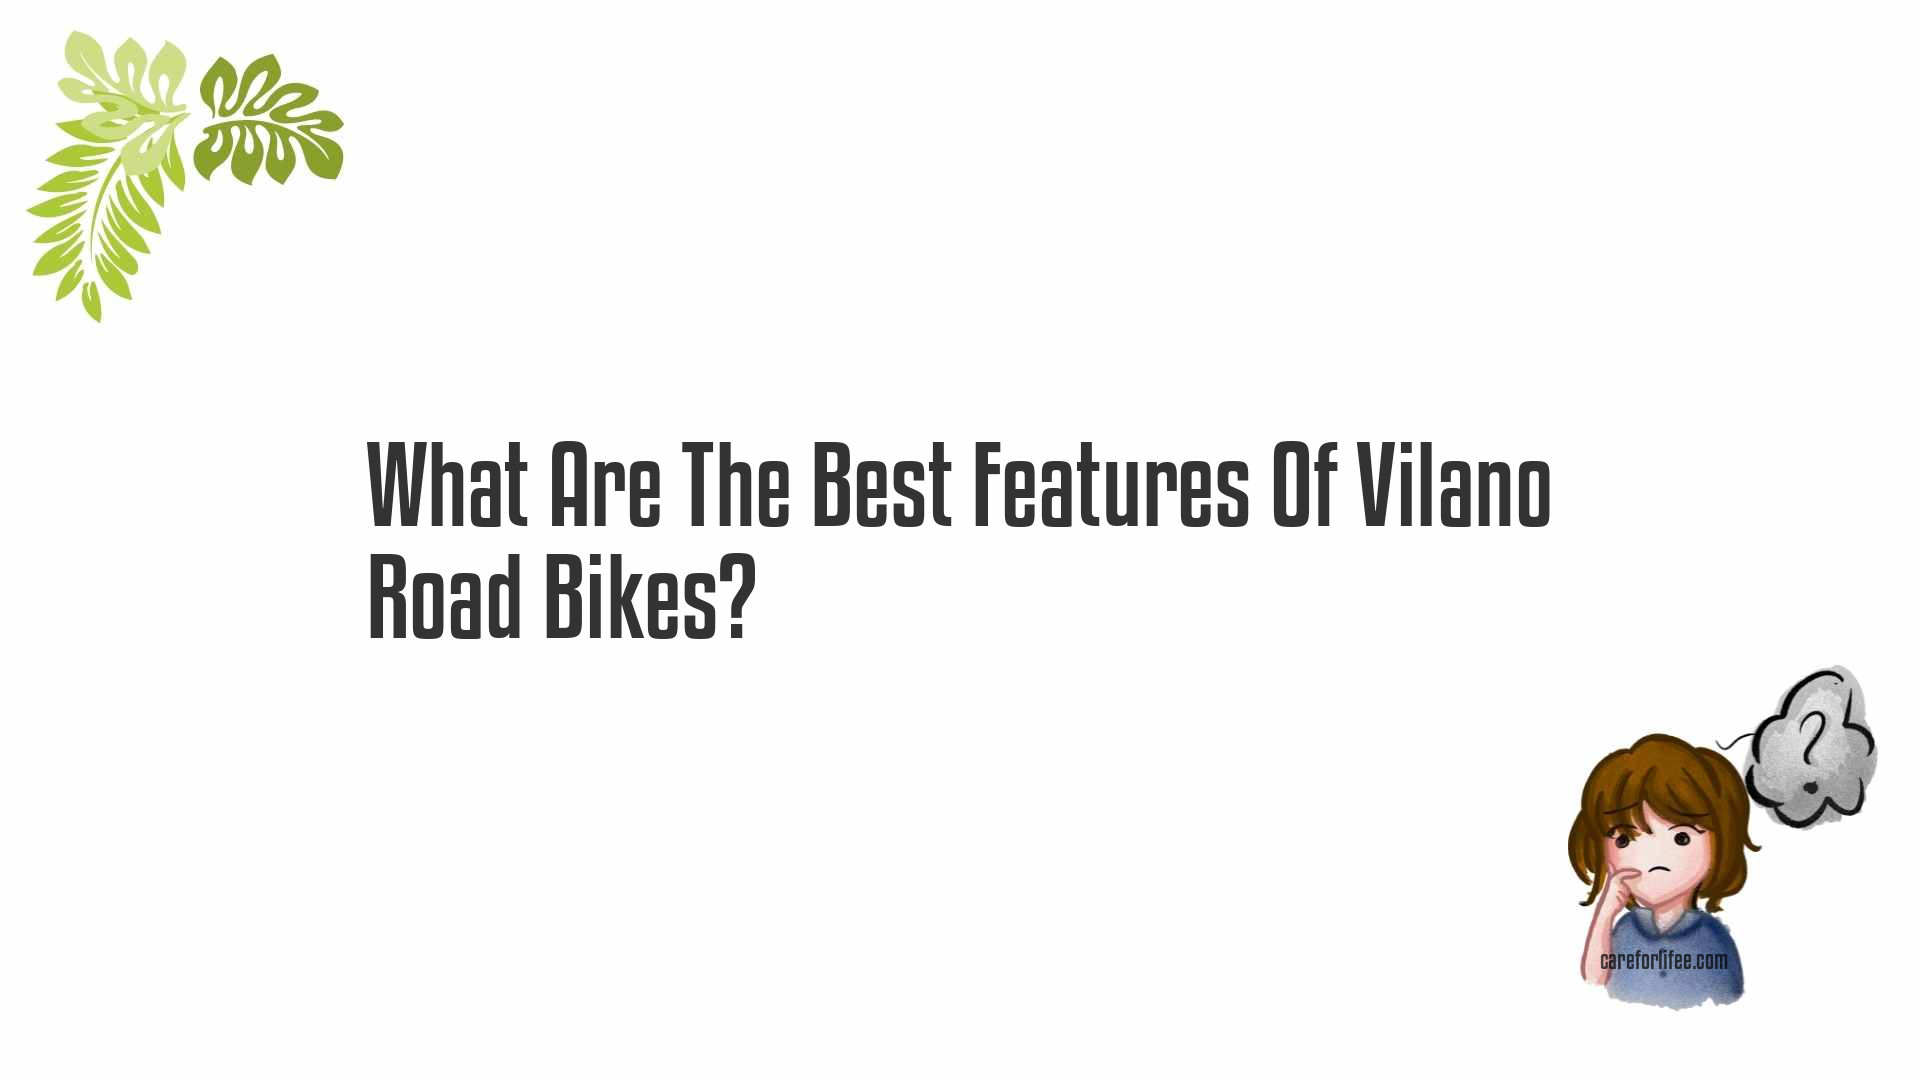 What Are The Best Features Of Vilano Road Bikes?